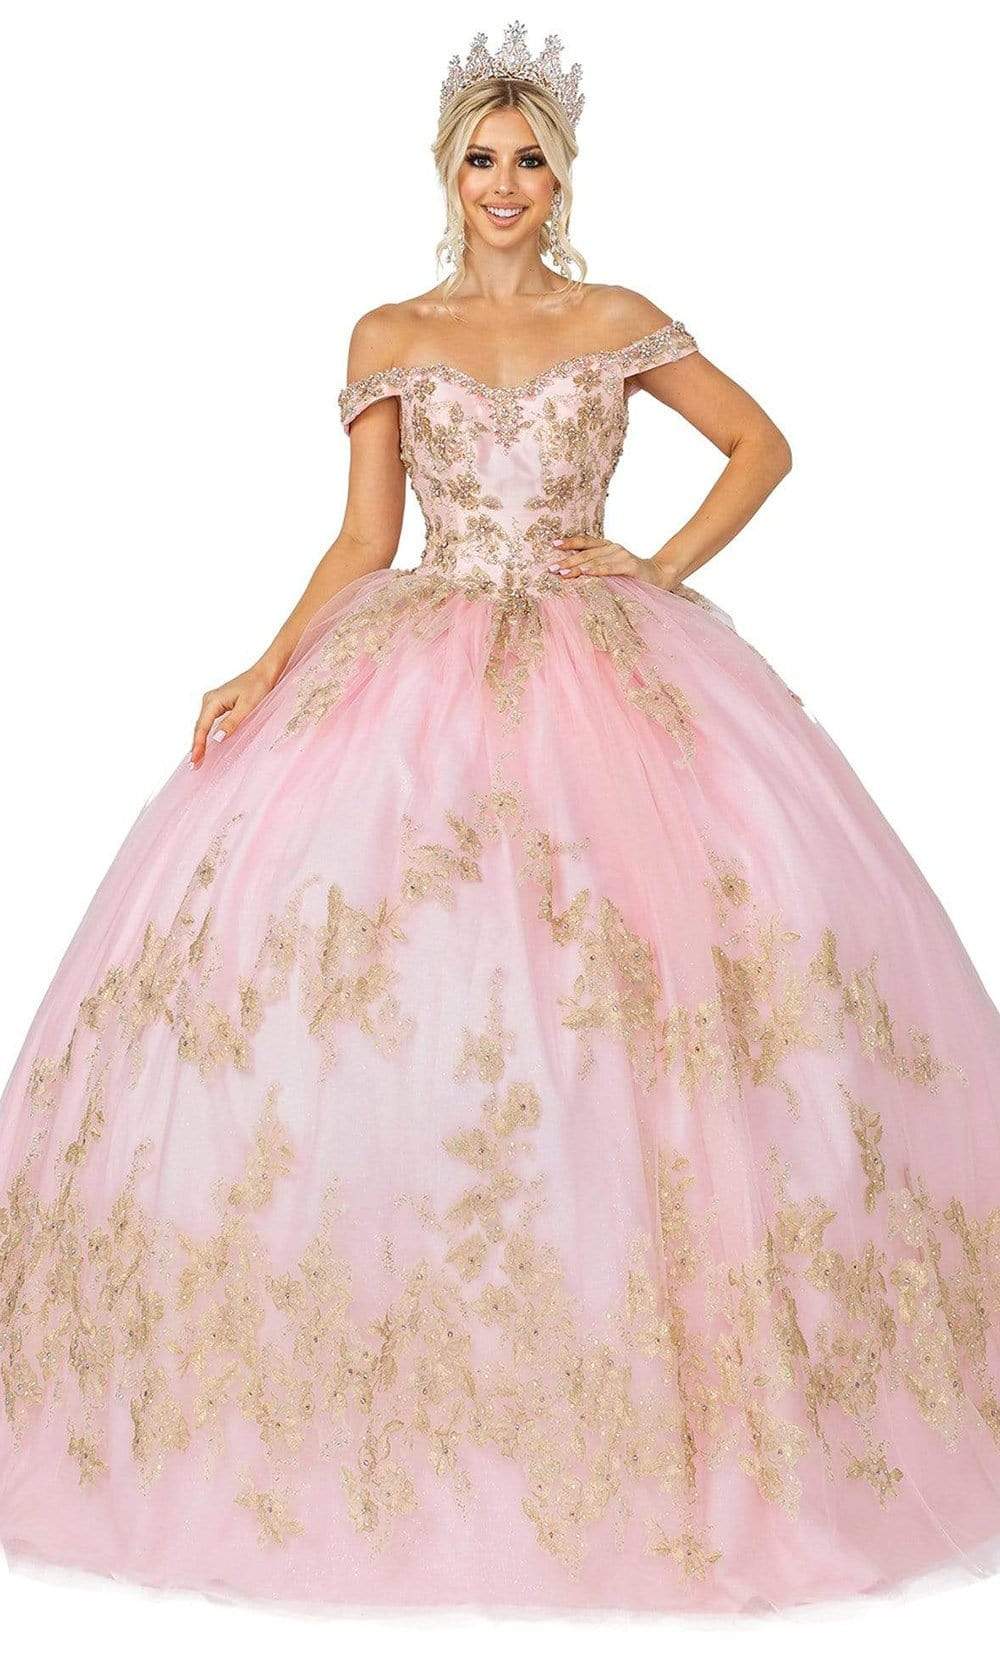 Dancing Queen - 1584 Rhinestone Lace Applique Gown Special Occasion Dress XS / Blush